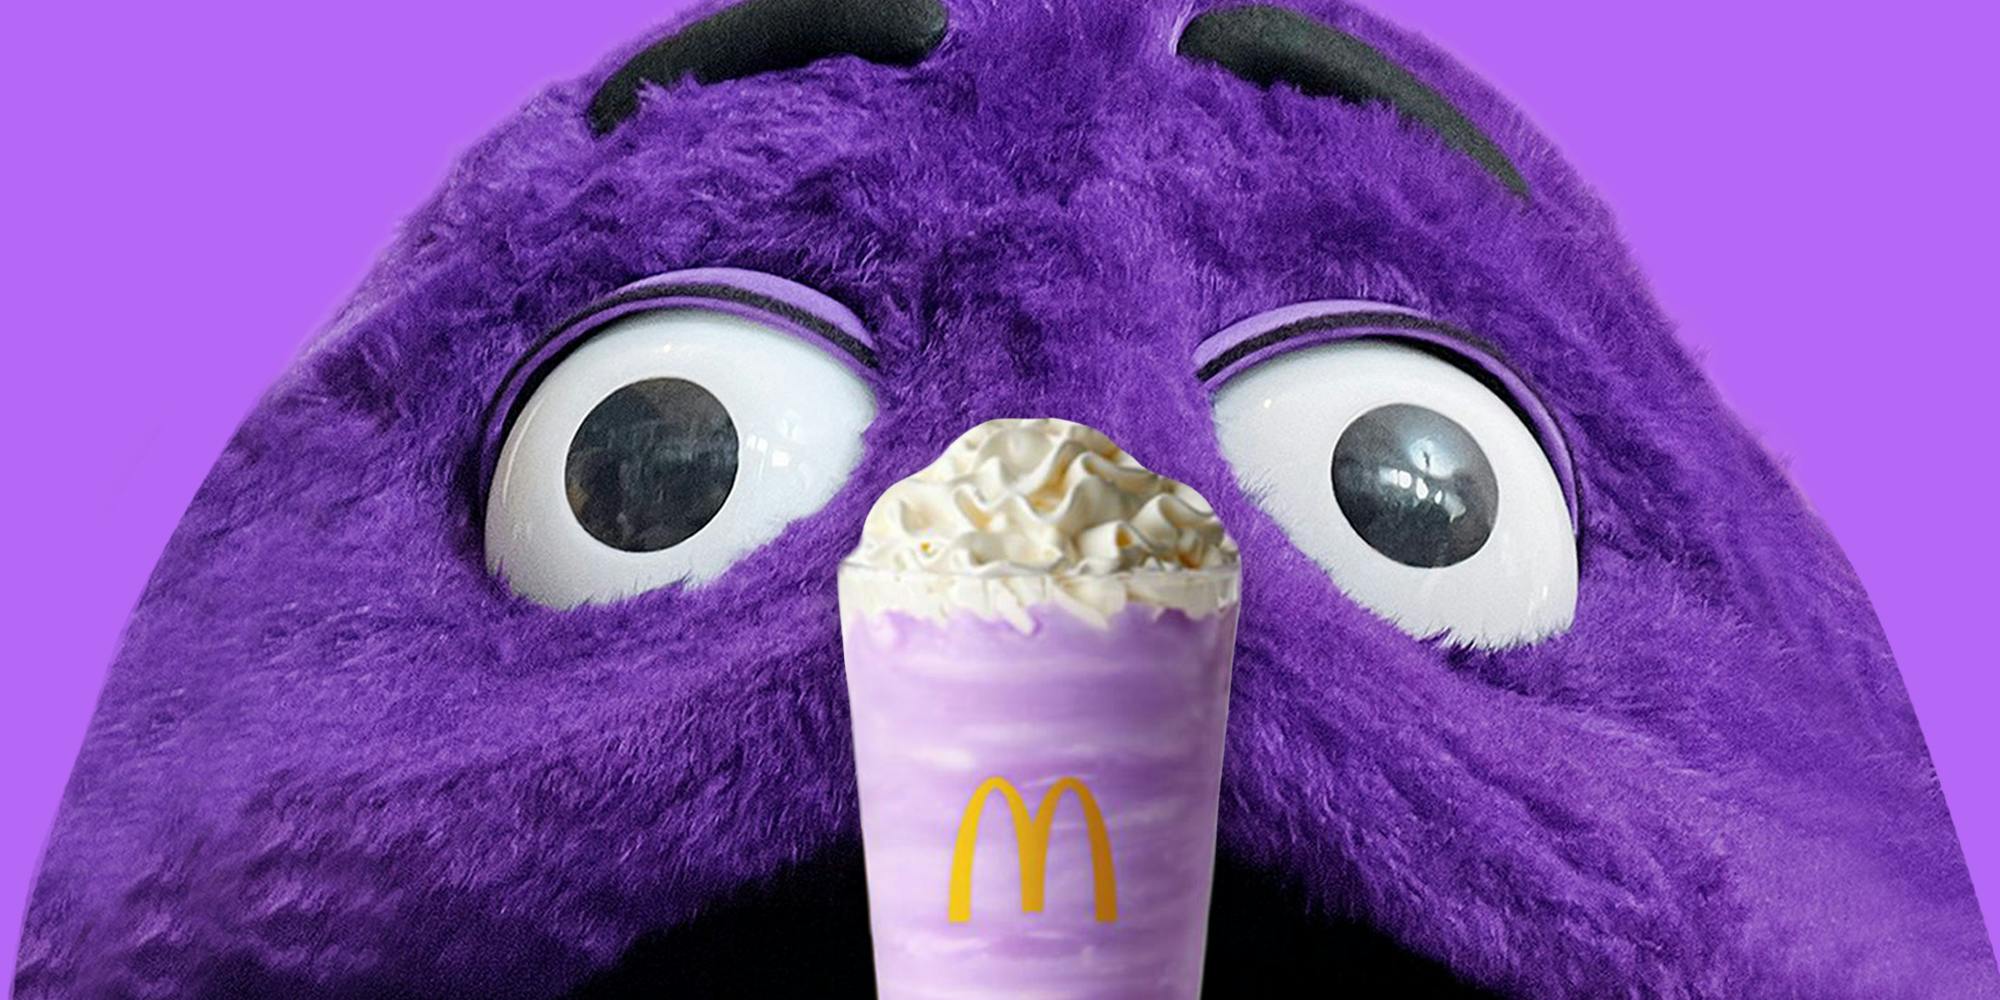 Grimace in front of purple background with Grimace shake